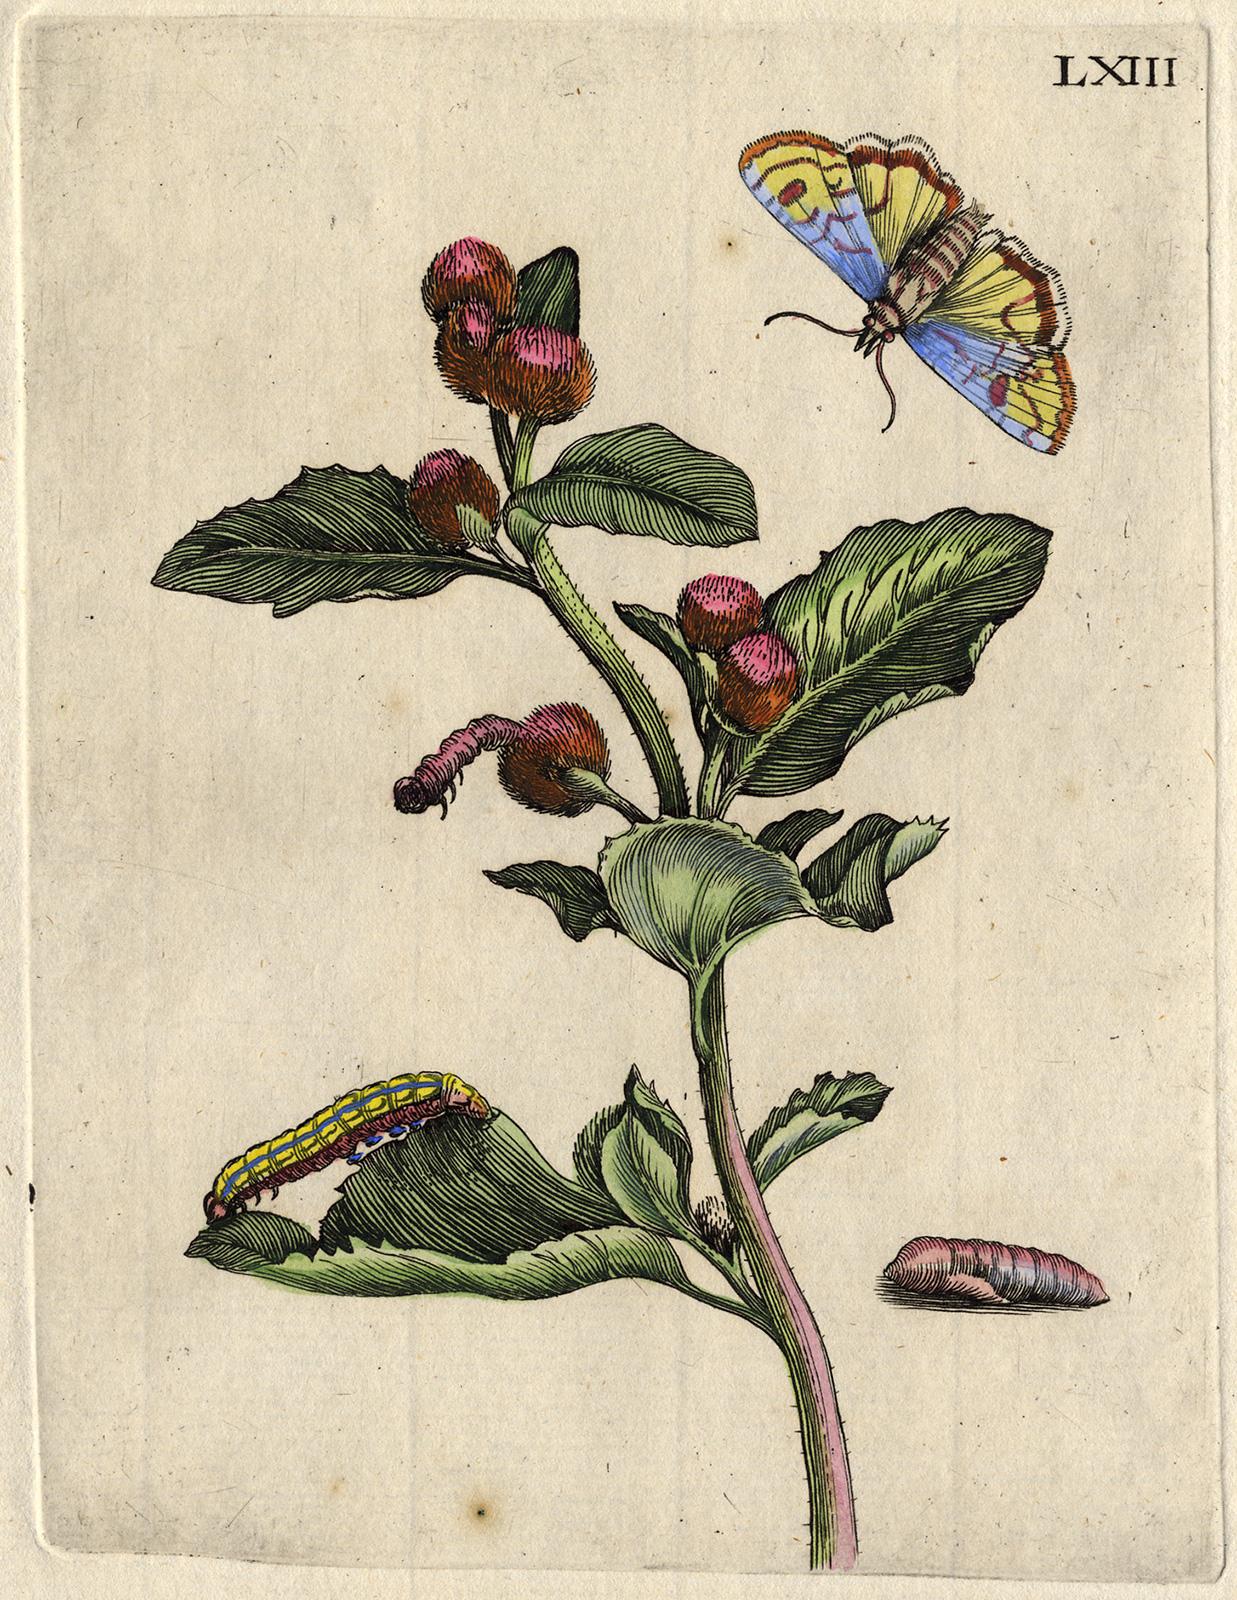 Greater Burdock with insects by Merian - Handcoloured engraving - 18th century - Print by Maria Sybilla Merian